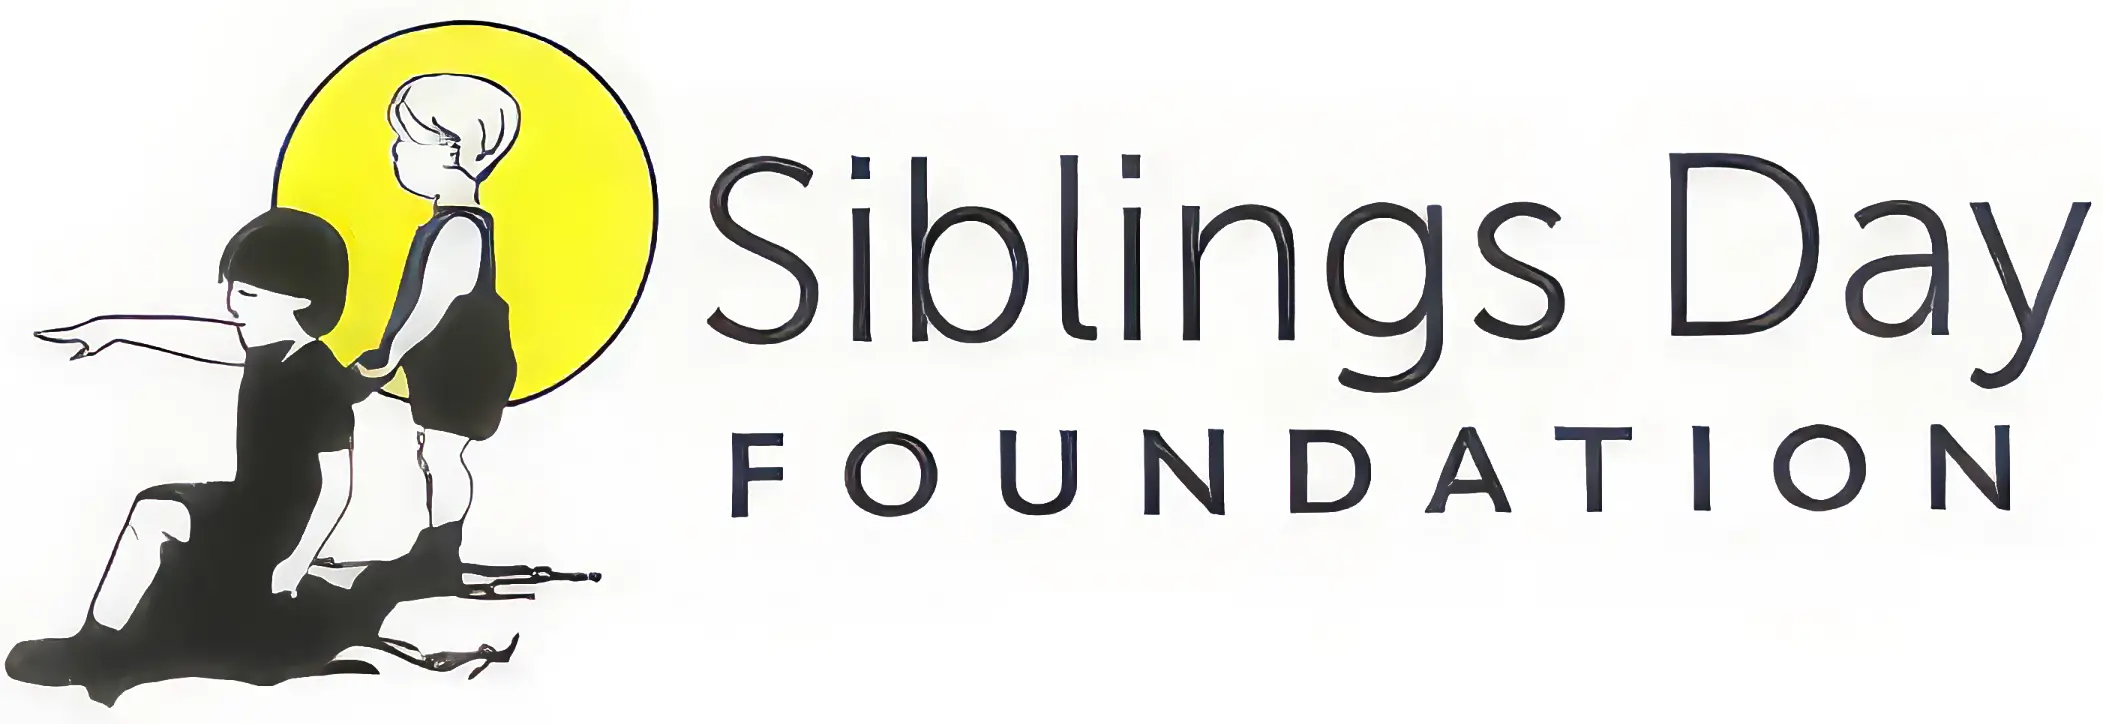 Siblings Day Foundation